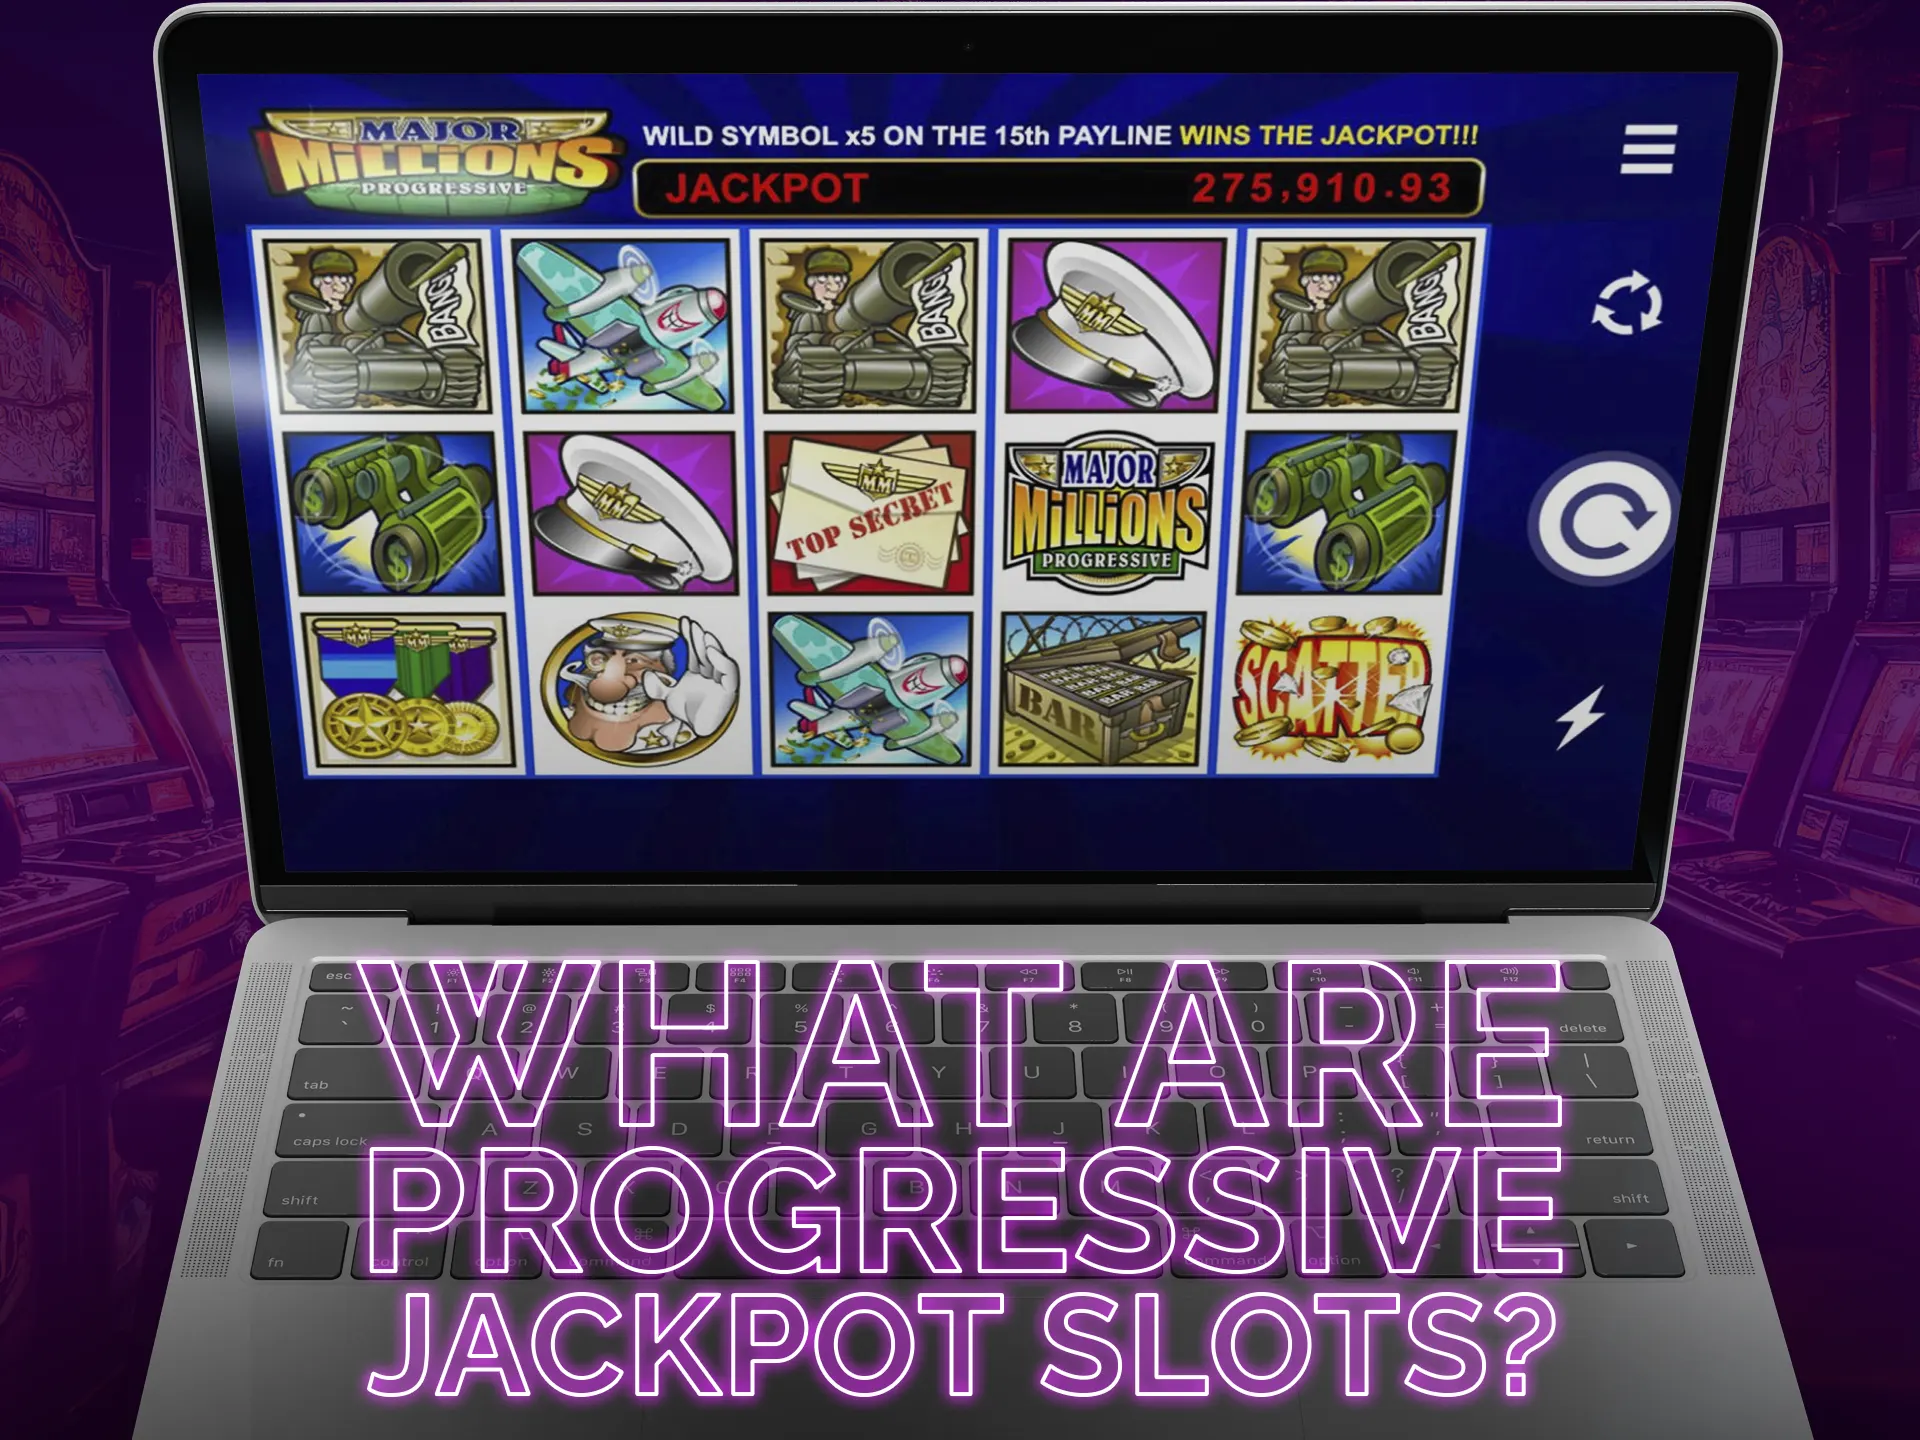 In a progressive jackpot slot machine, there is a constant increase in the jackpot.